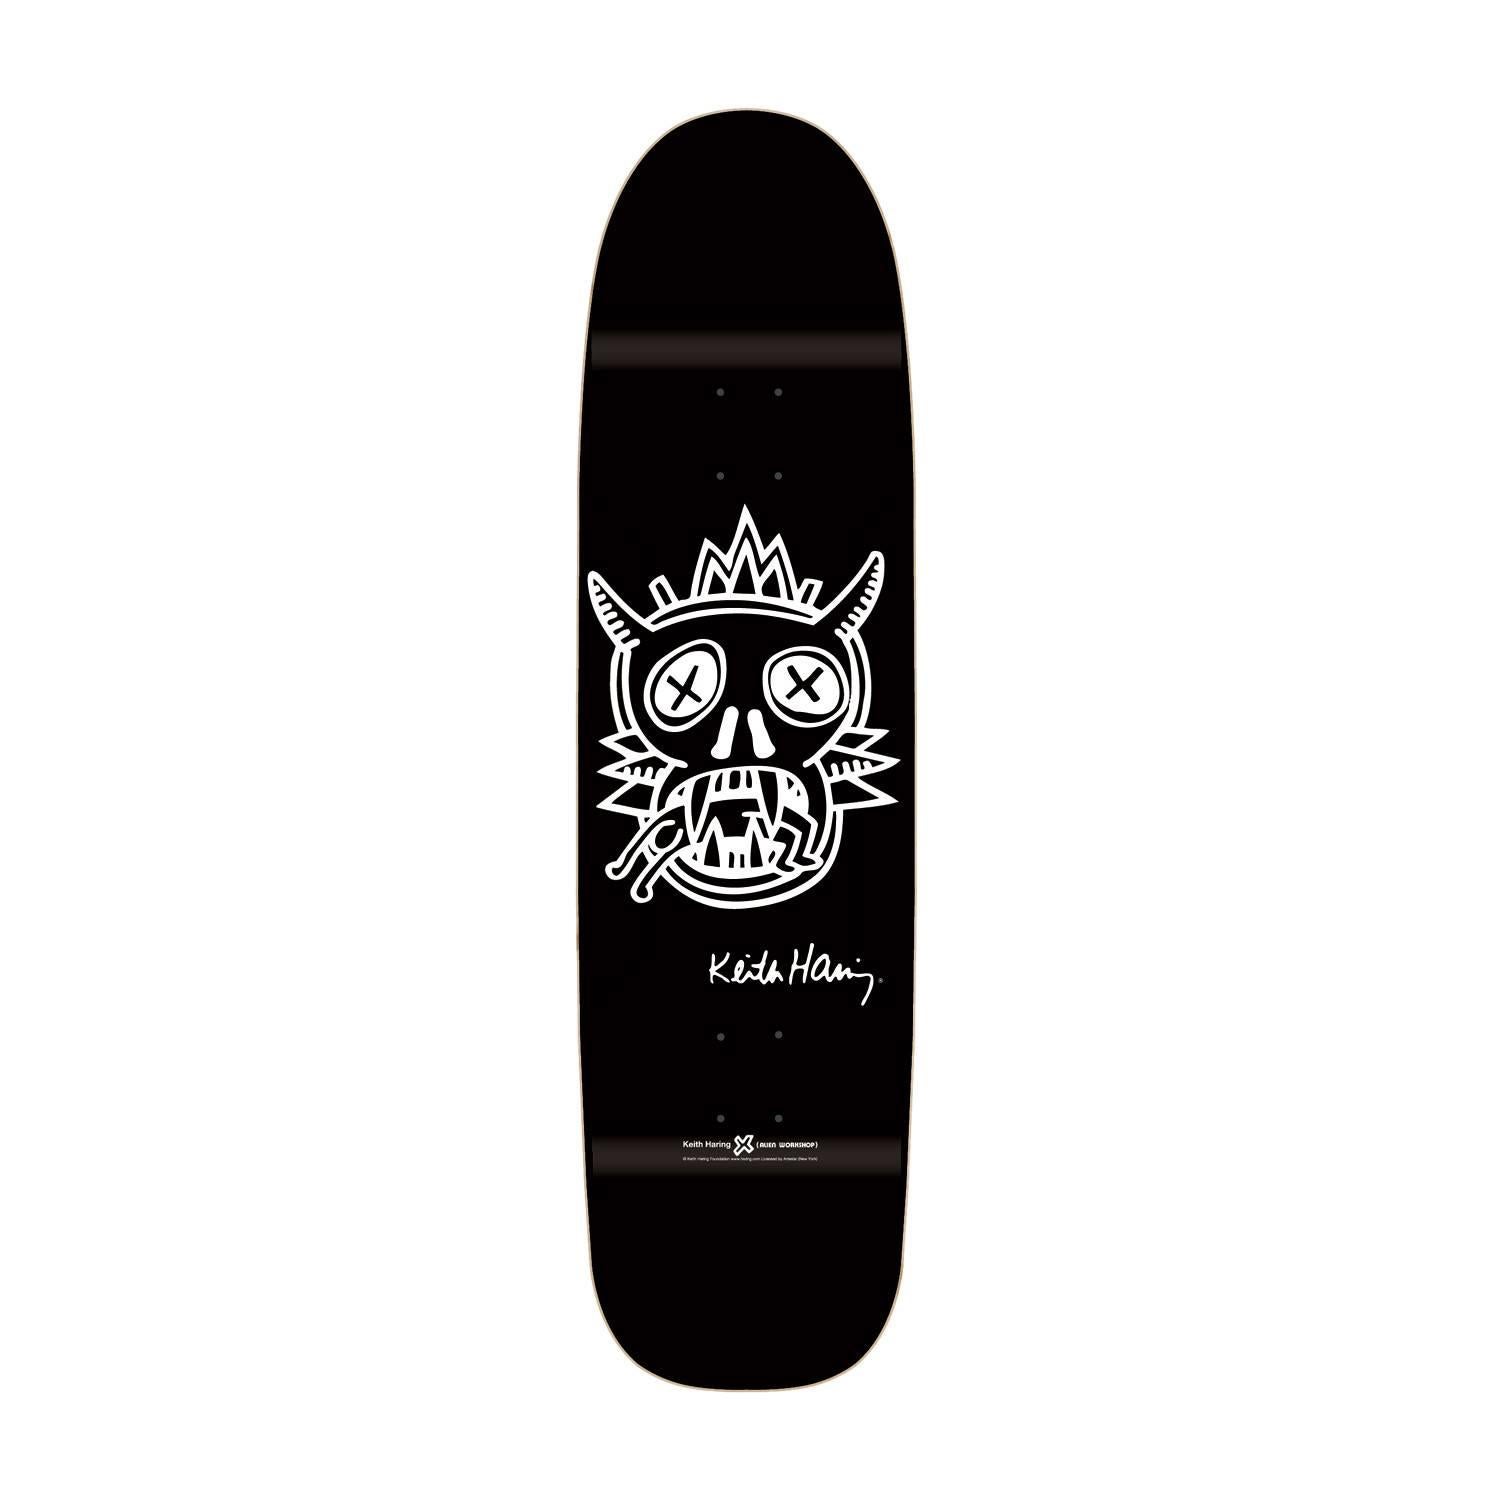 (after) Keith Haring Figurative Print - Keith Haring Skateboard Deck (Black)